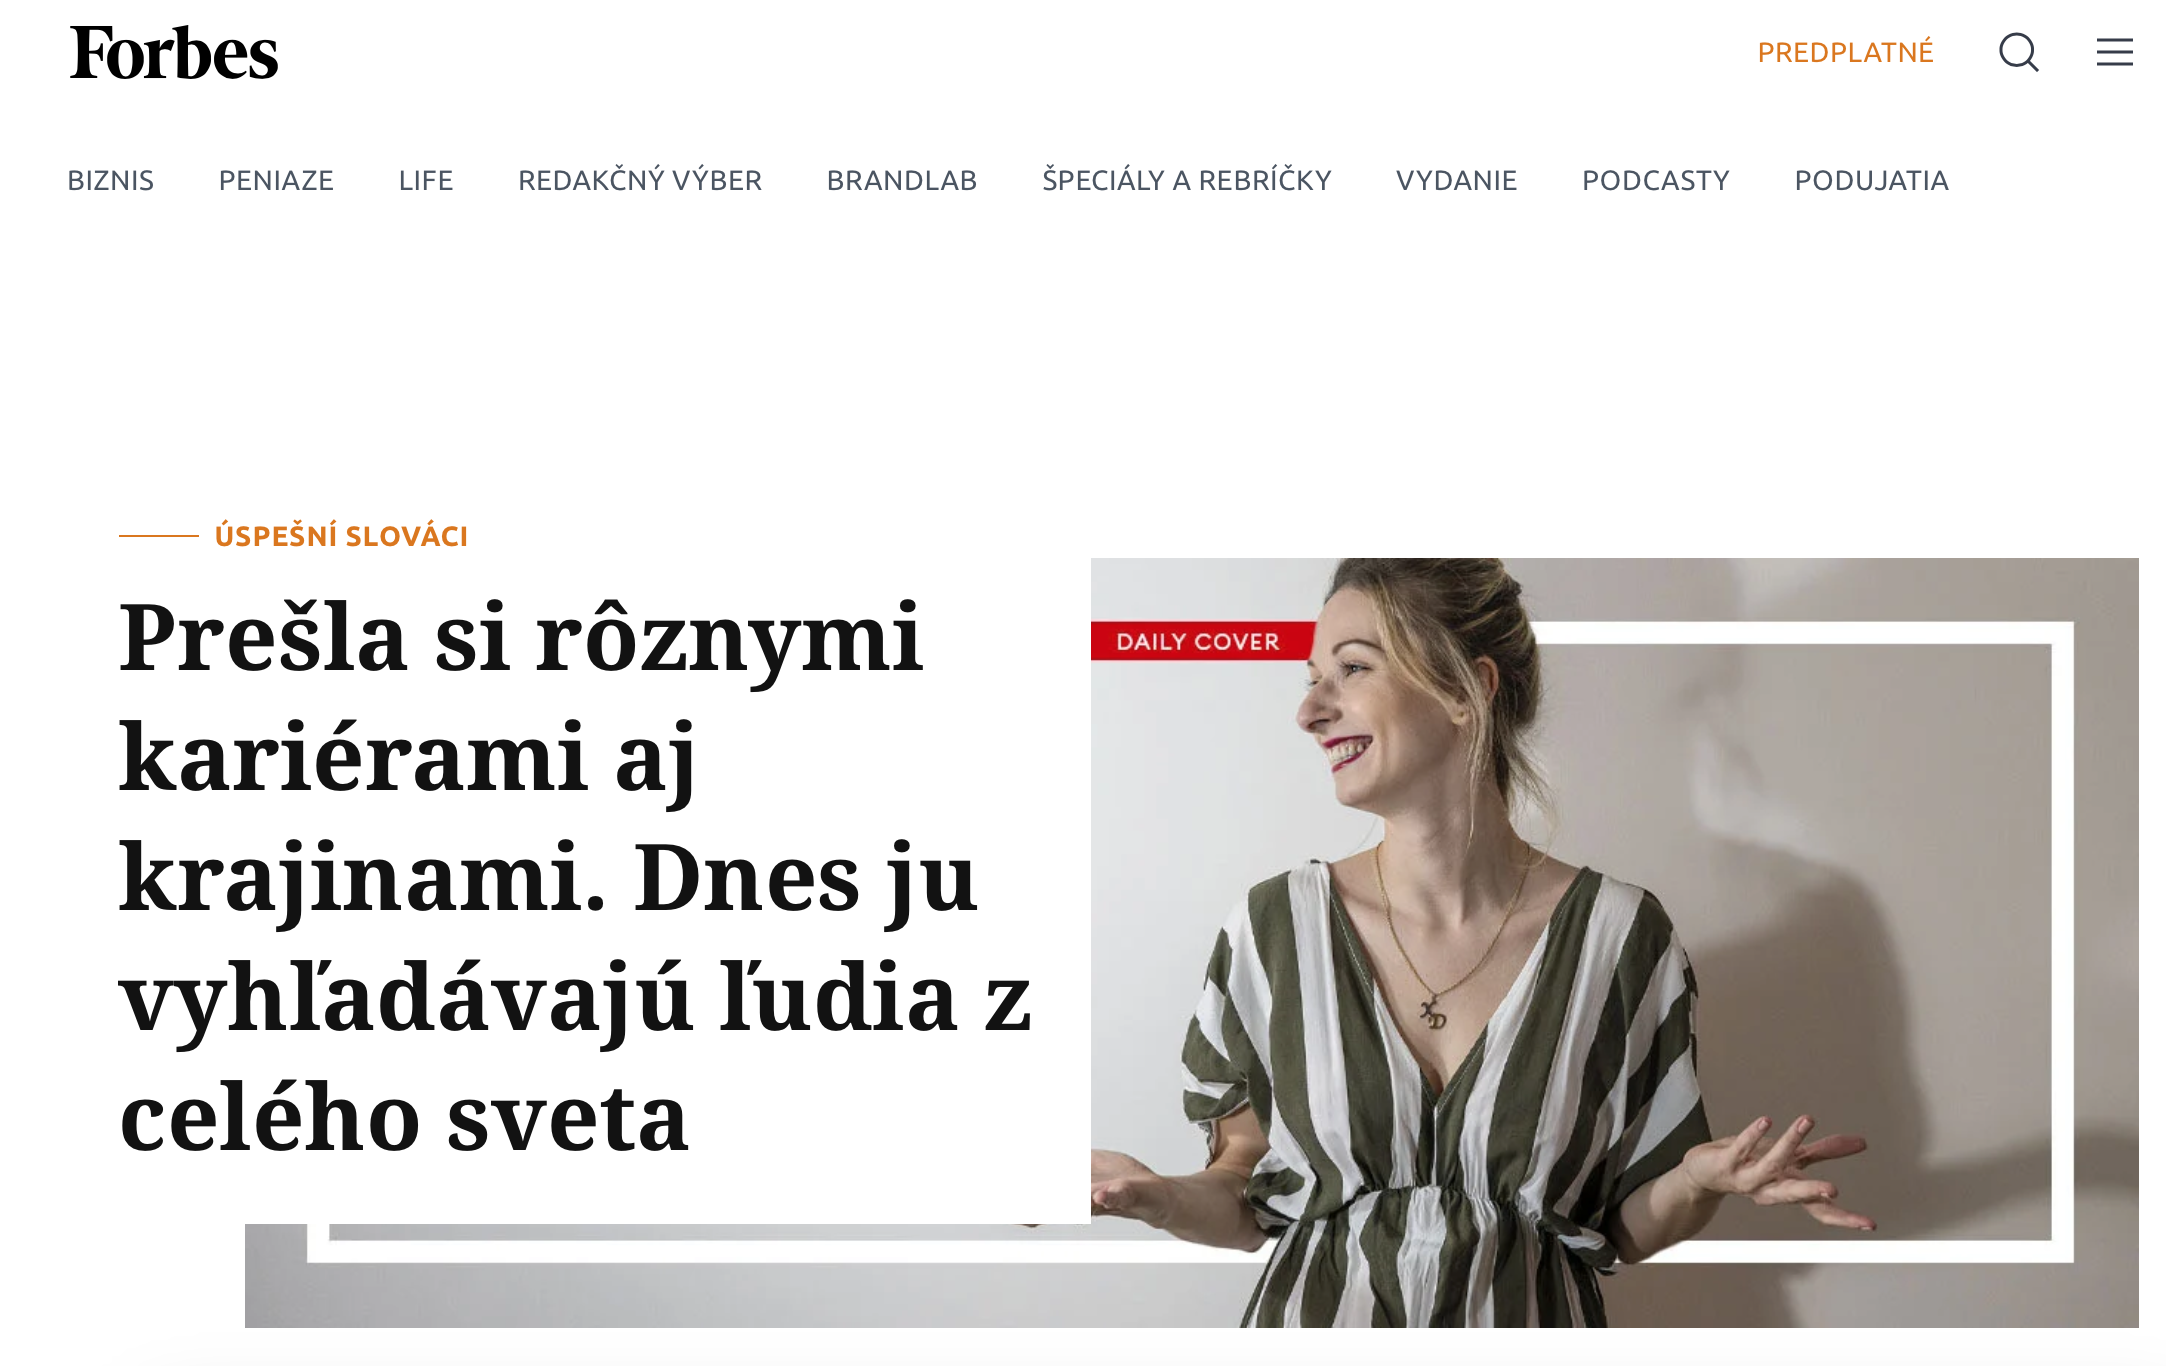 Xenia in Forbes